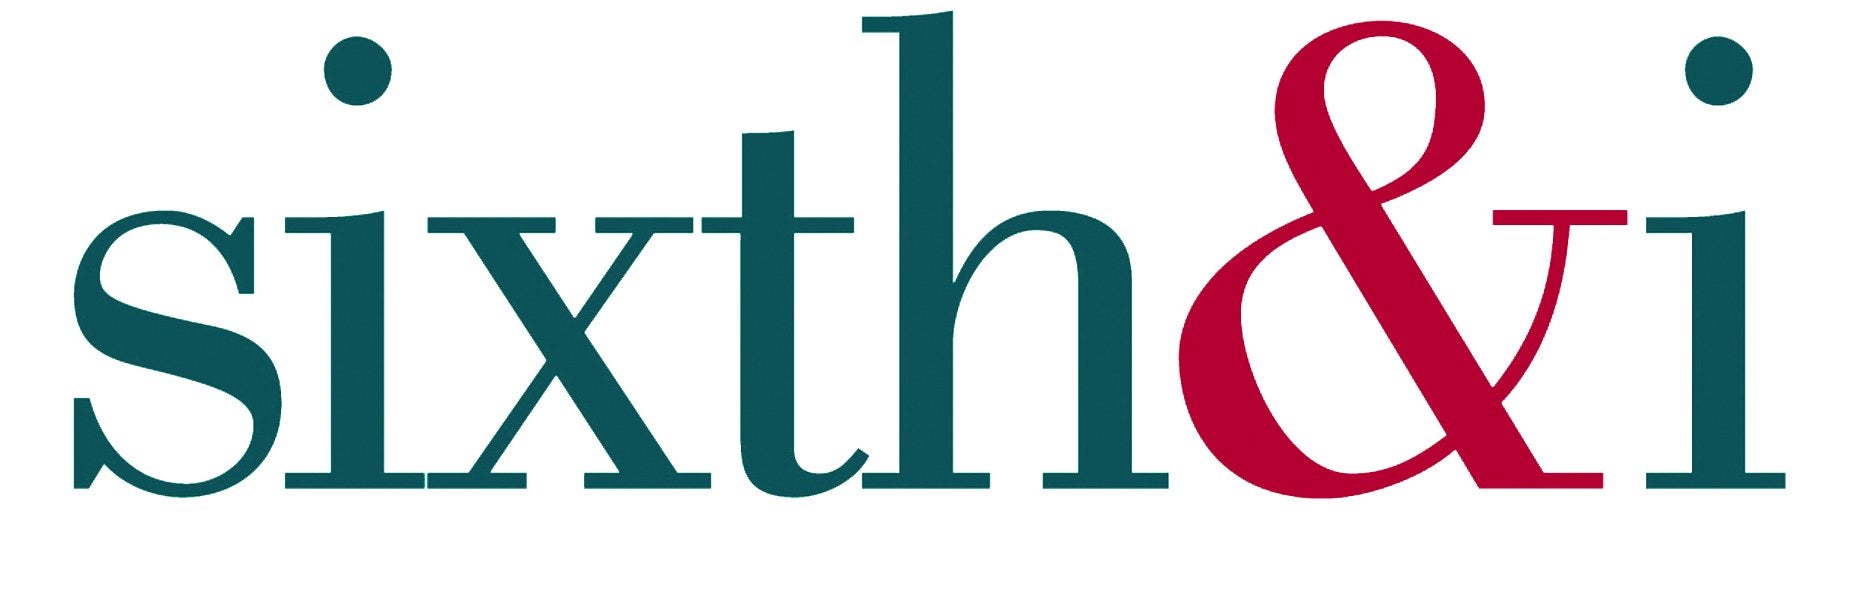 The logo for the Sixth & i event space in Washington, DC.